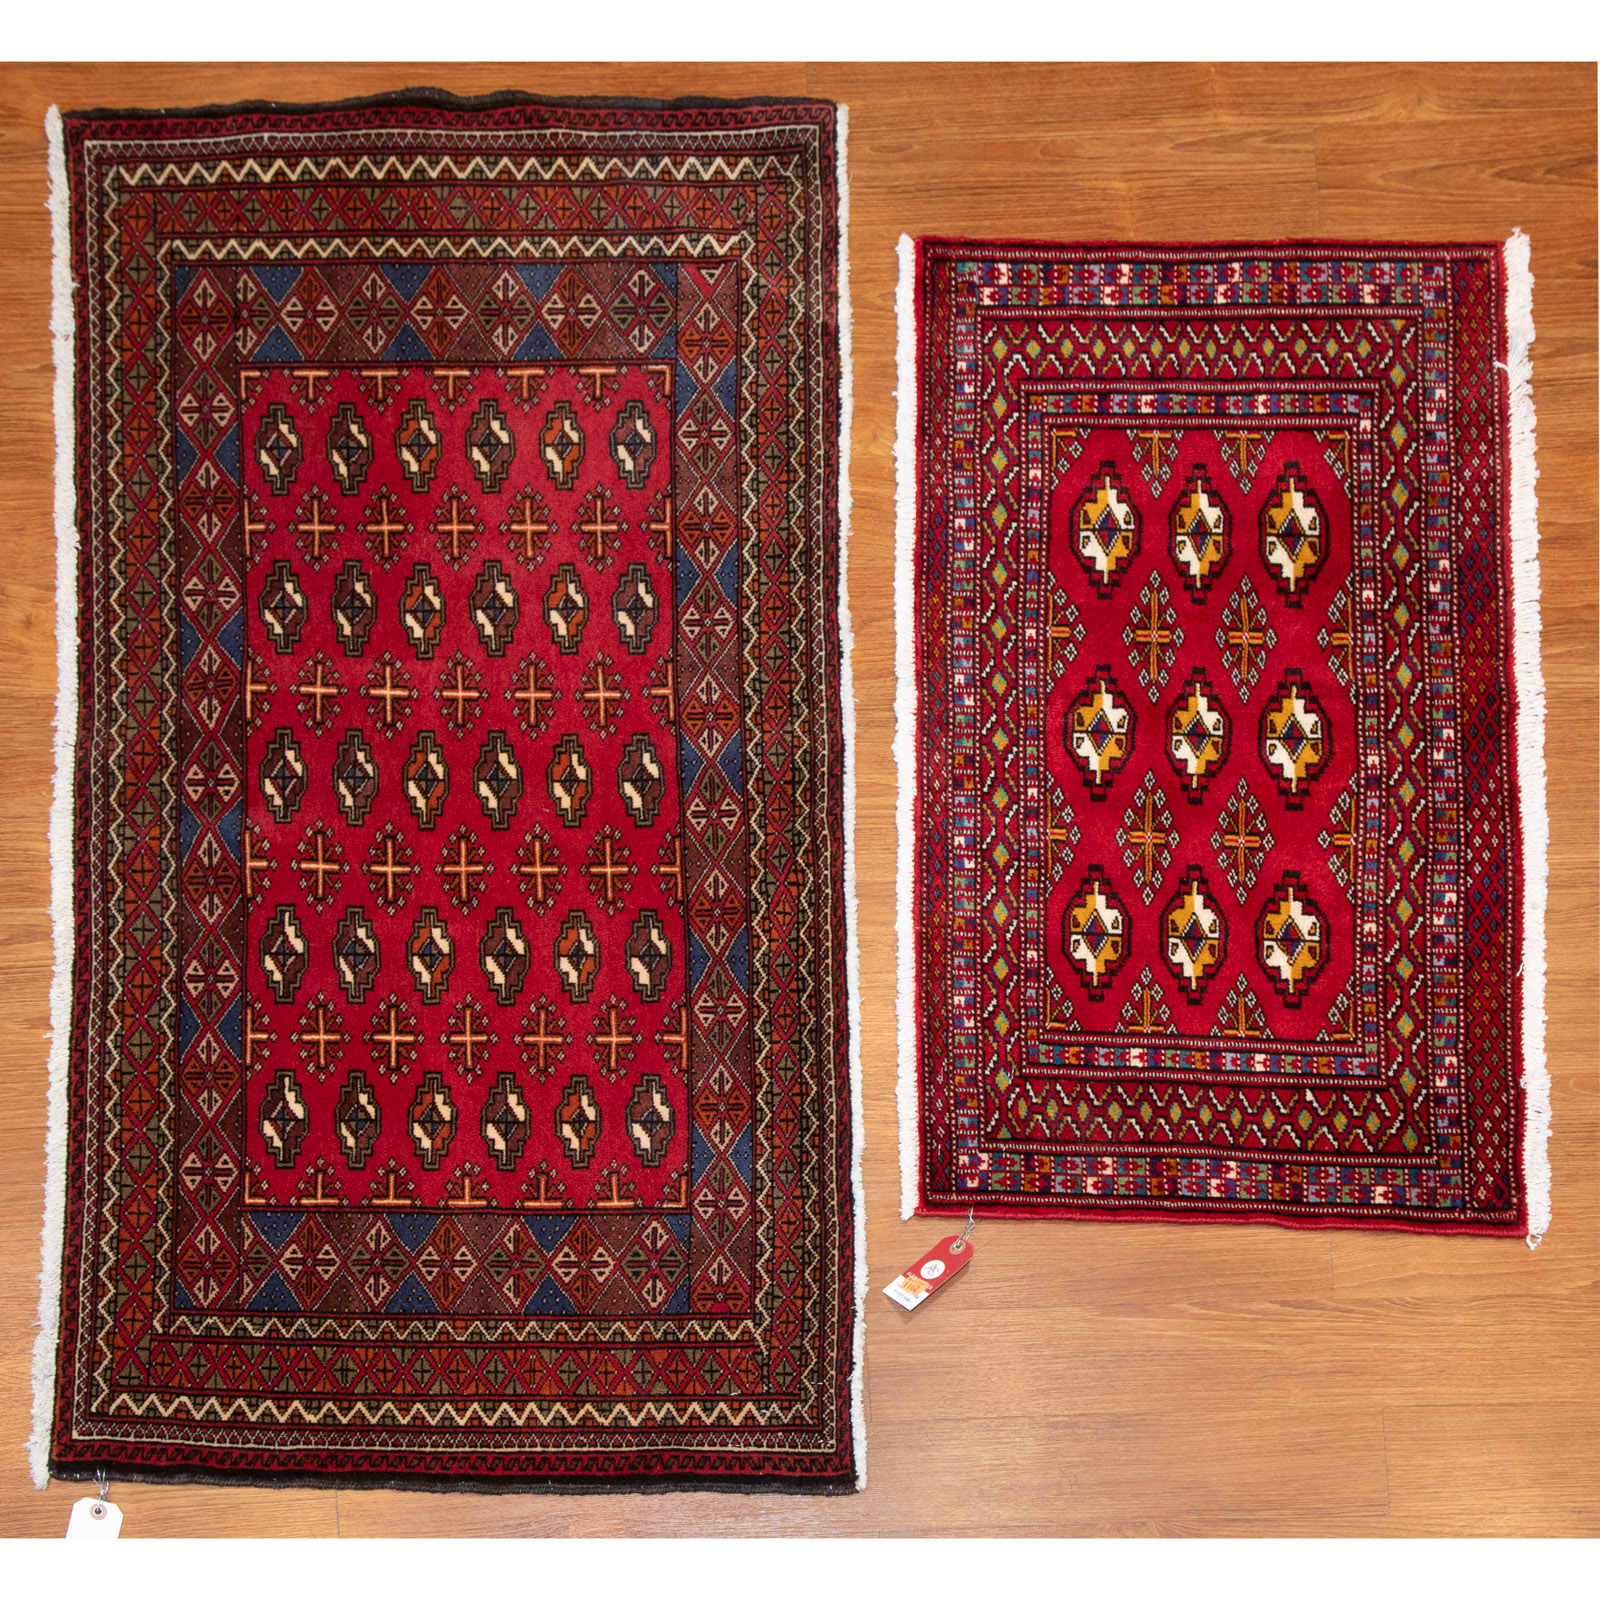 A PAIR OF TURKOMAN RUGS, AFGHANISTAN